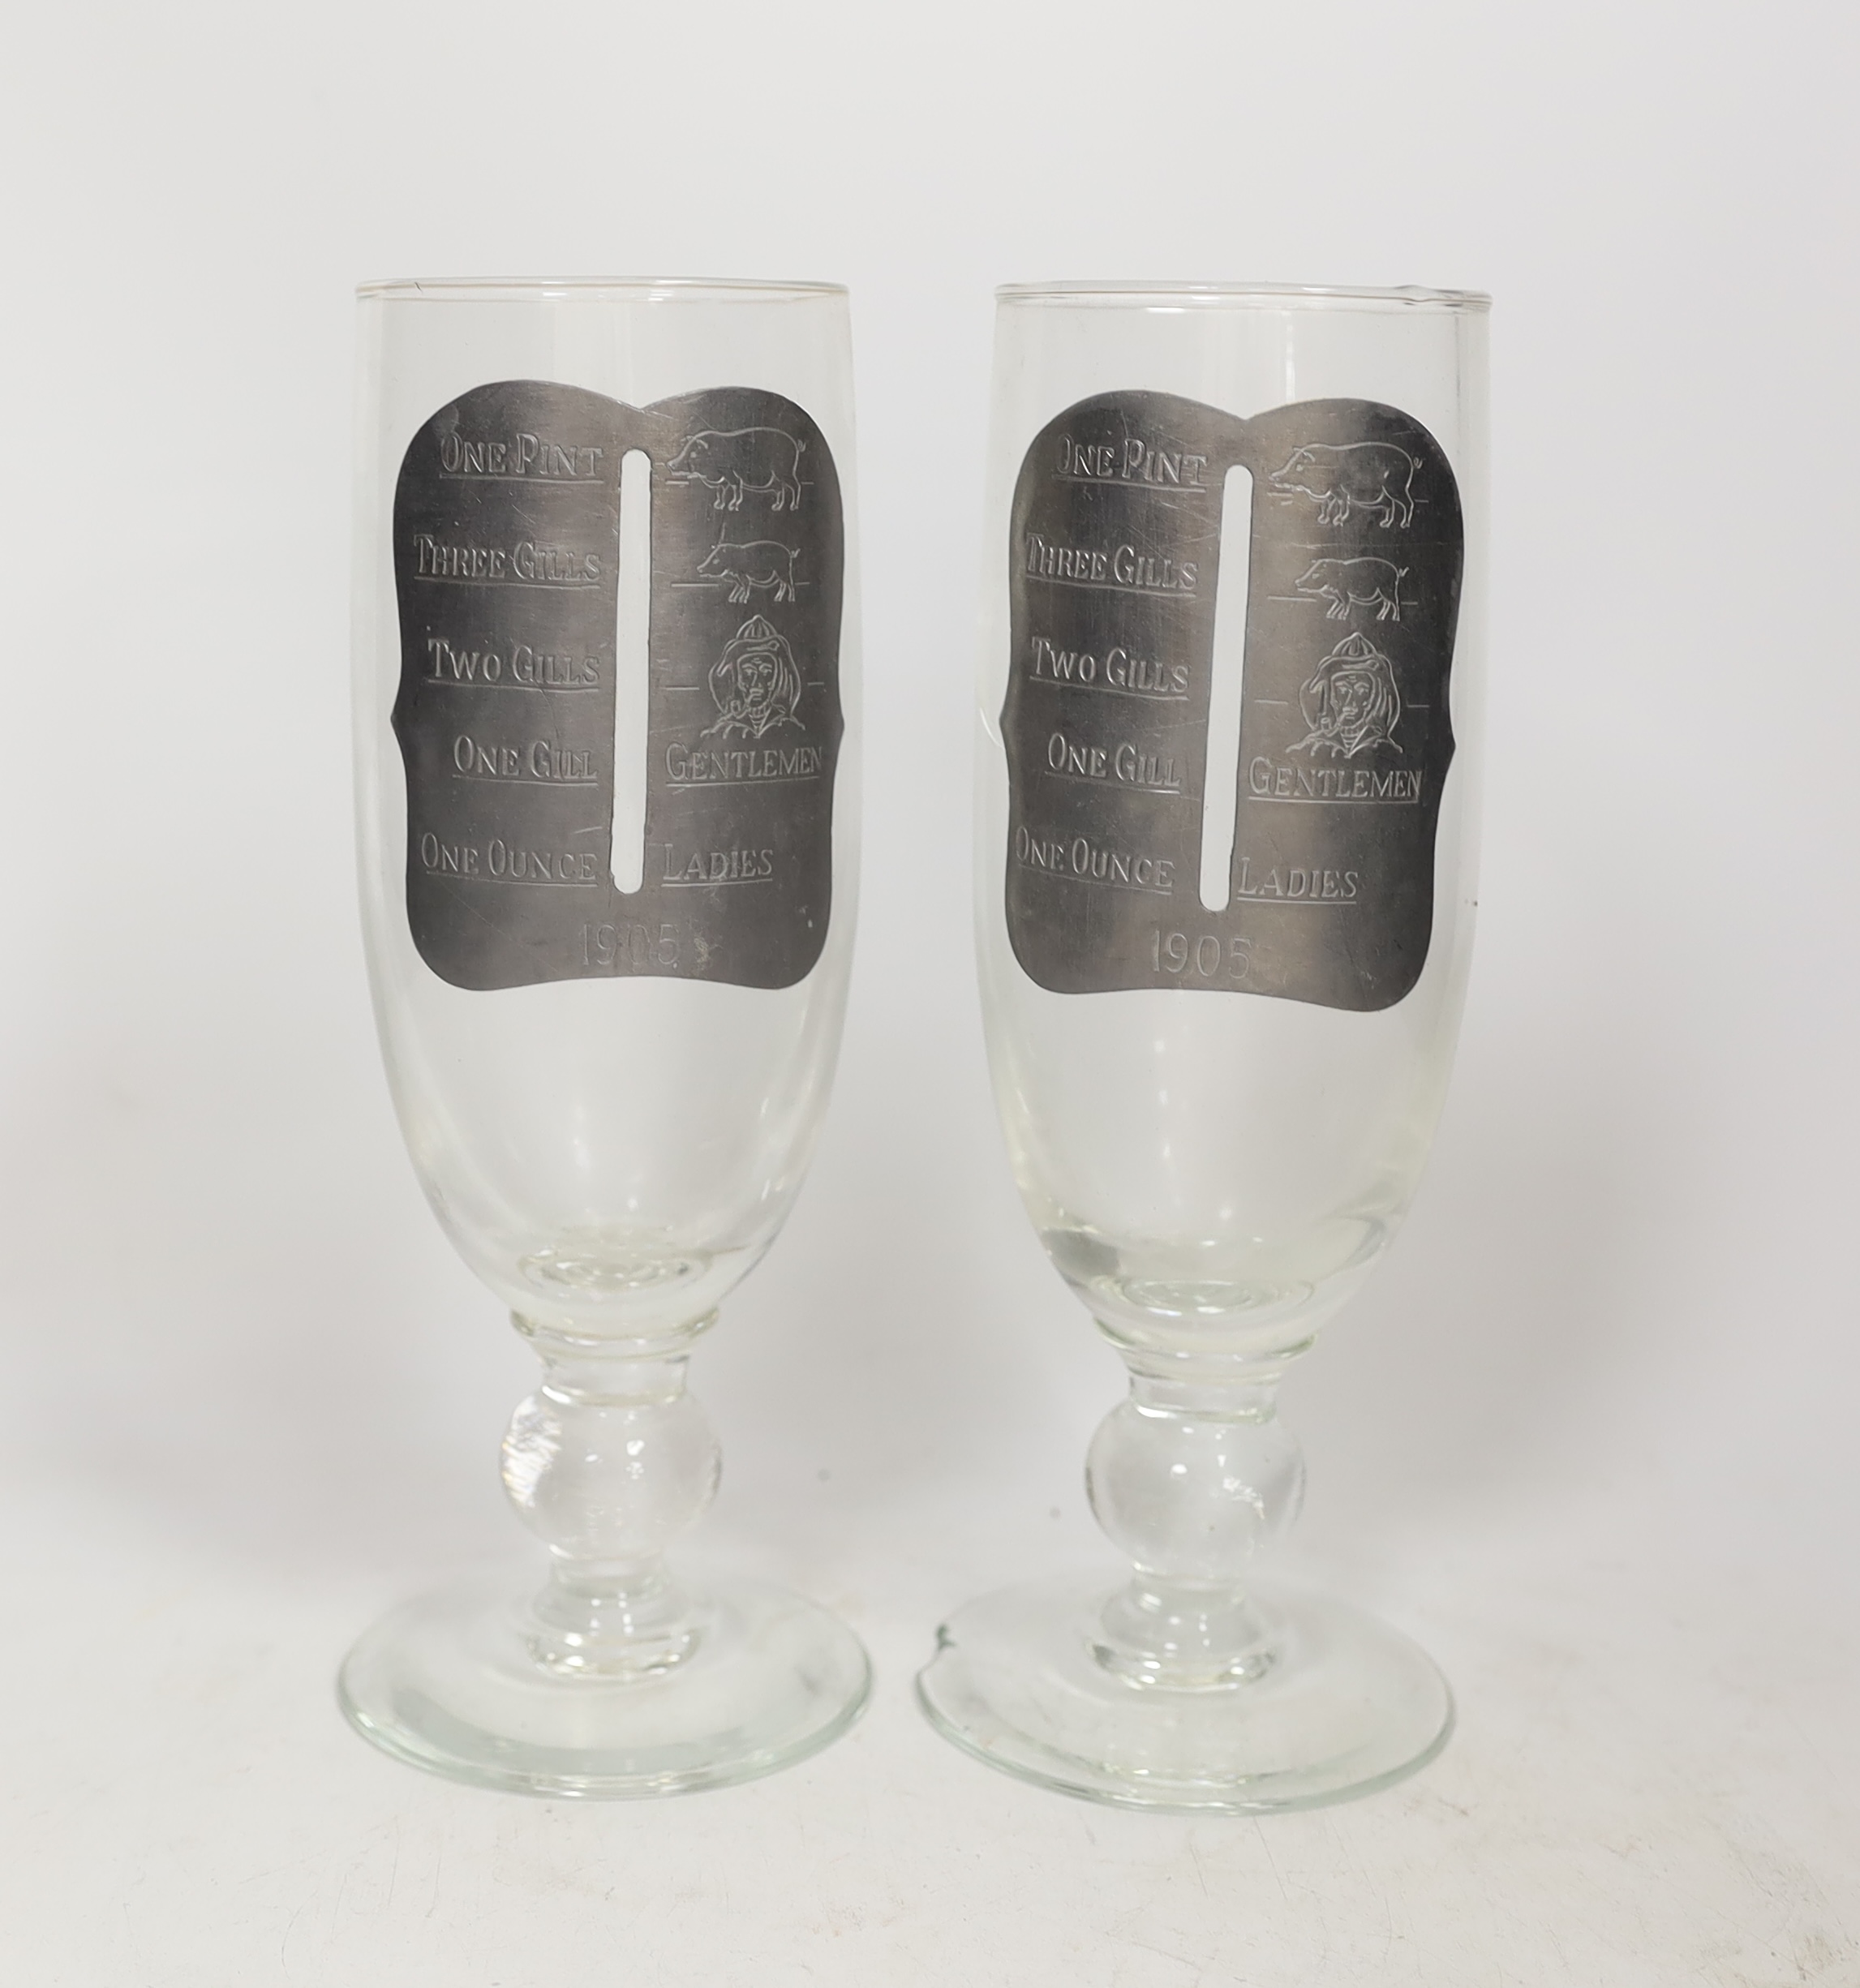 A pair of early 20th century drinking glasses with pewter measures, in a wooden case, one cracked and chipped, 24cm